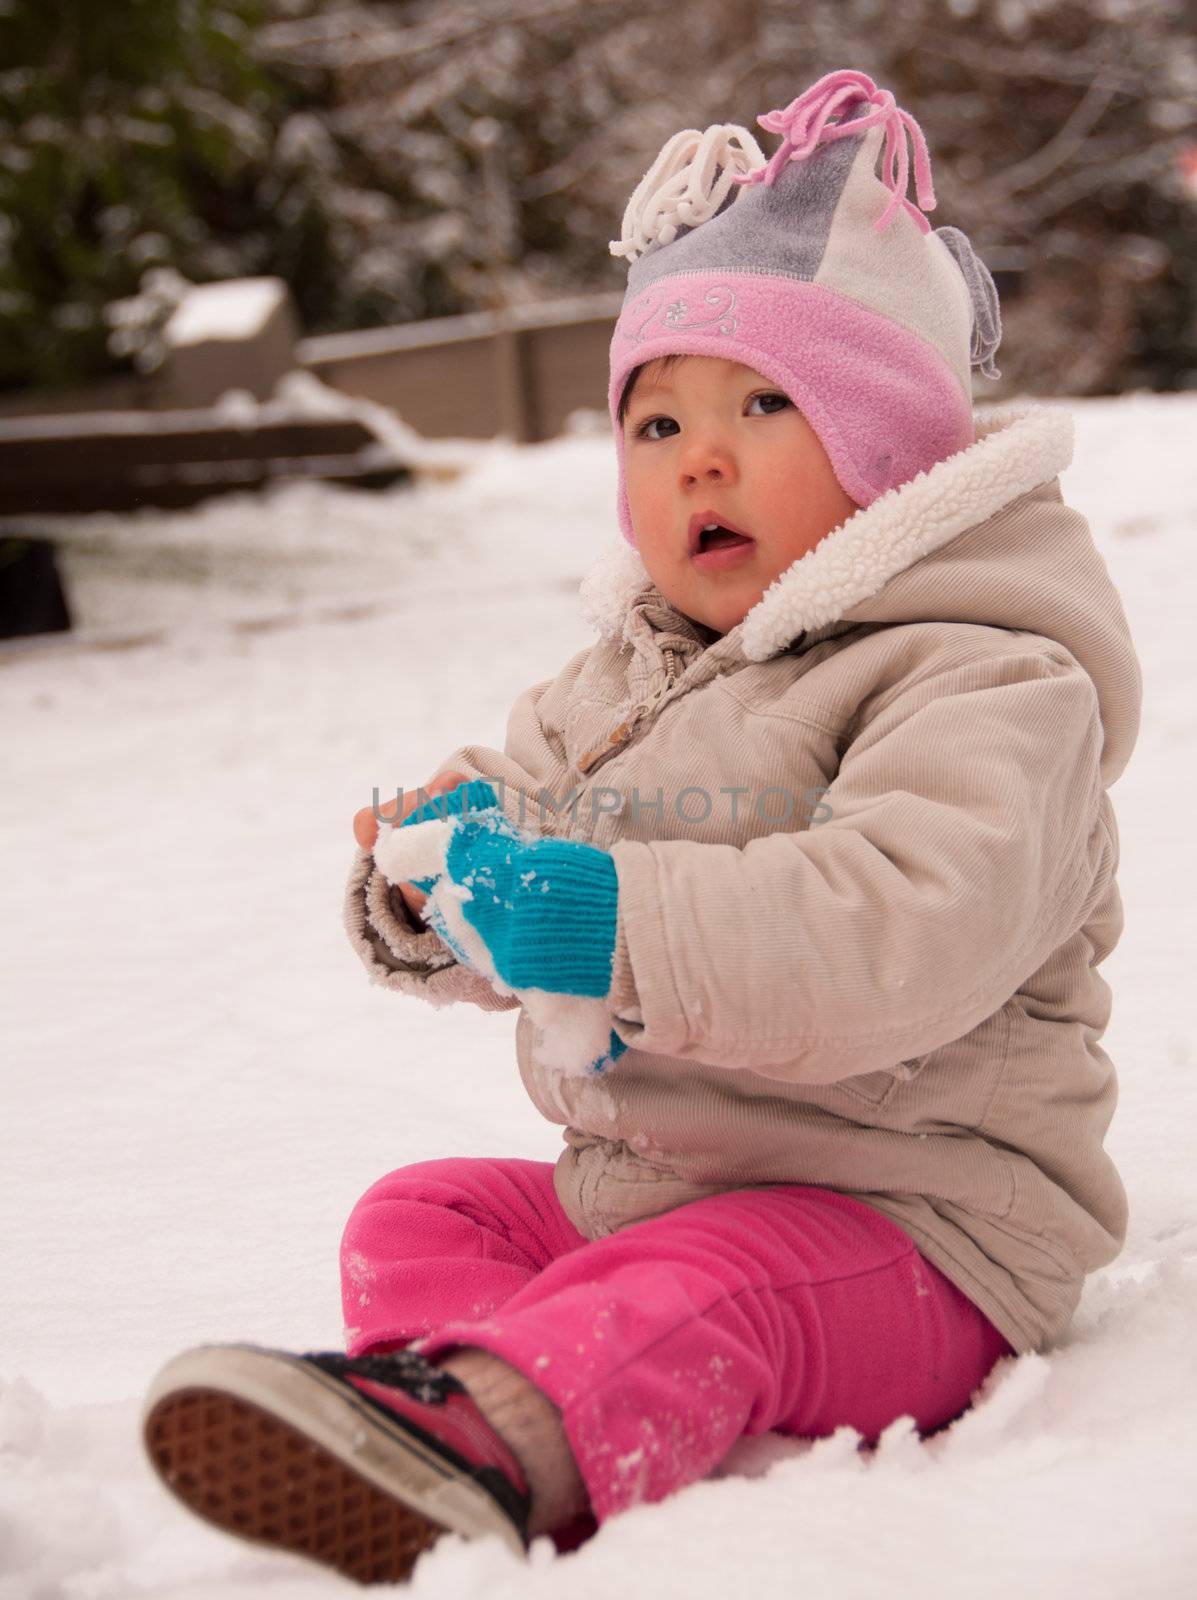 Toddler sitting in snow looking cute